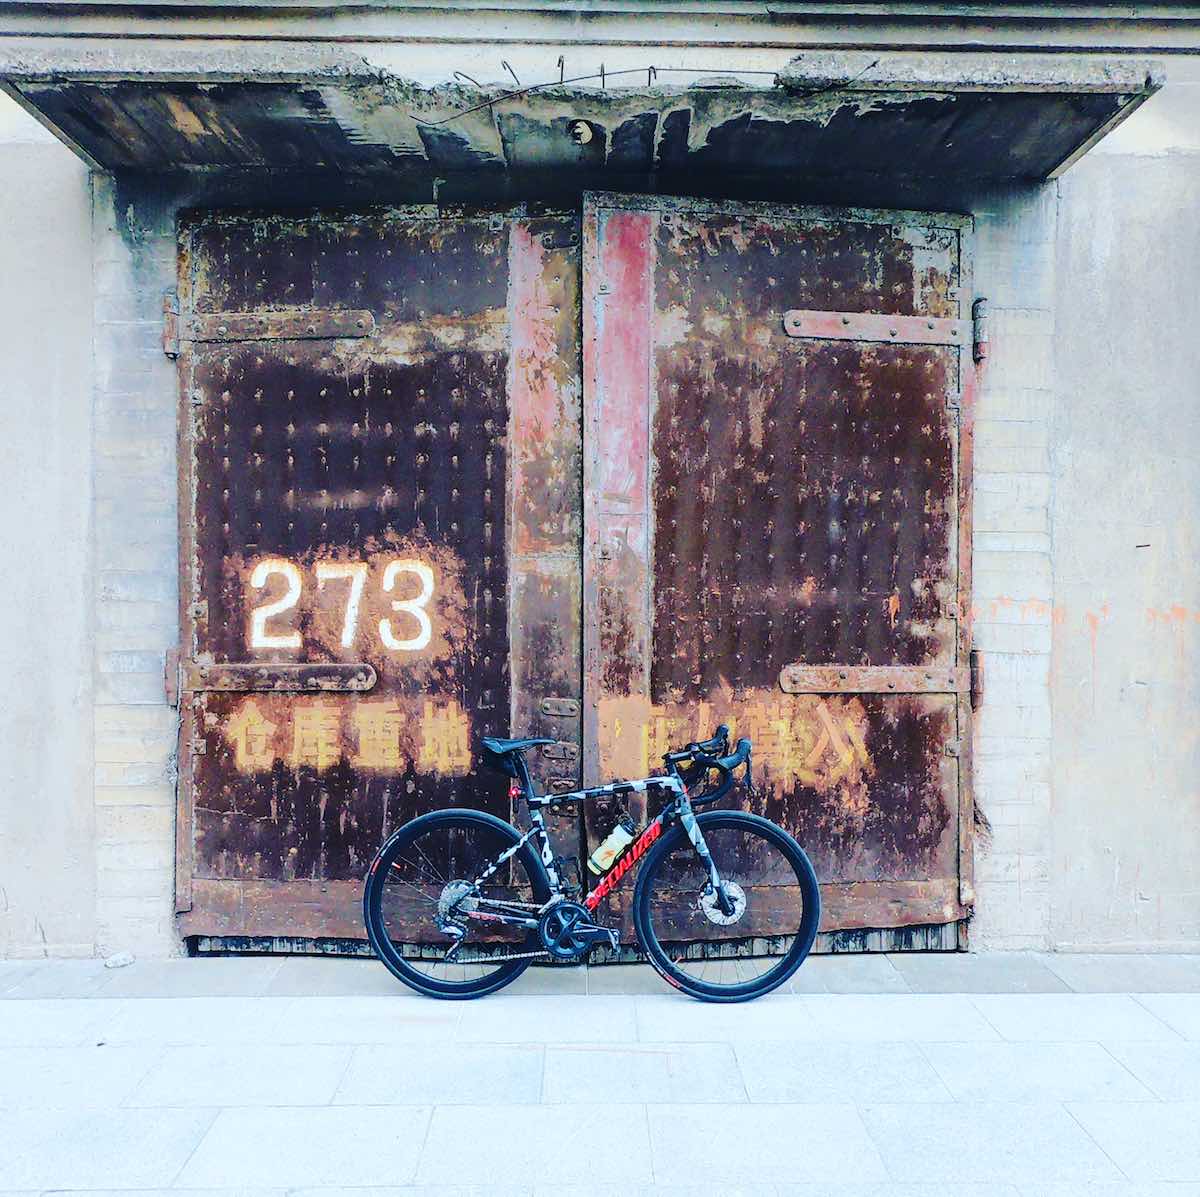 bikerumor pic of the day bicycle leaning against rusty warehouse door in Shanghai-Pudong, China on the Bund.